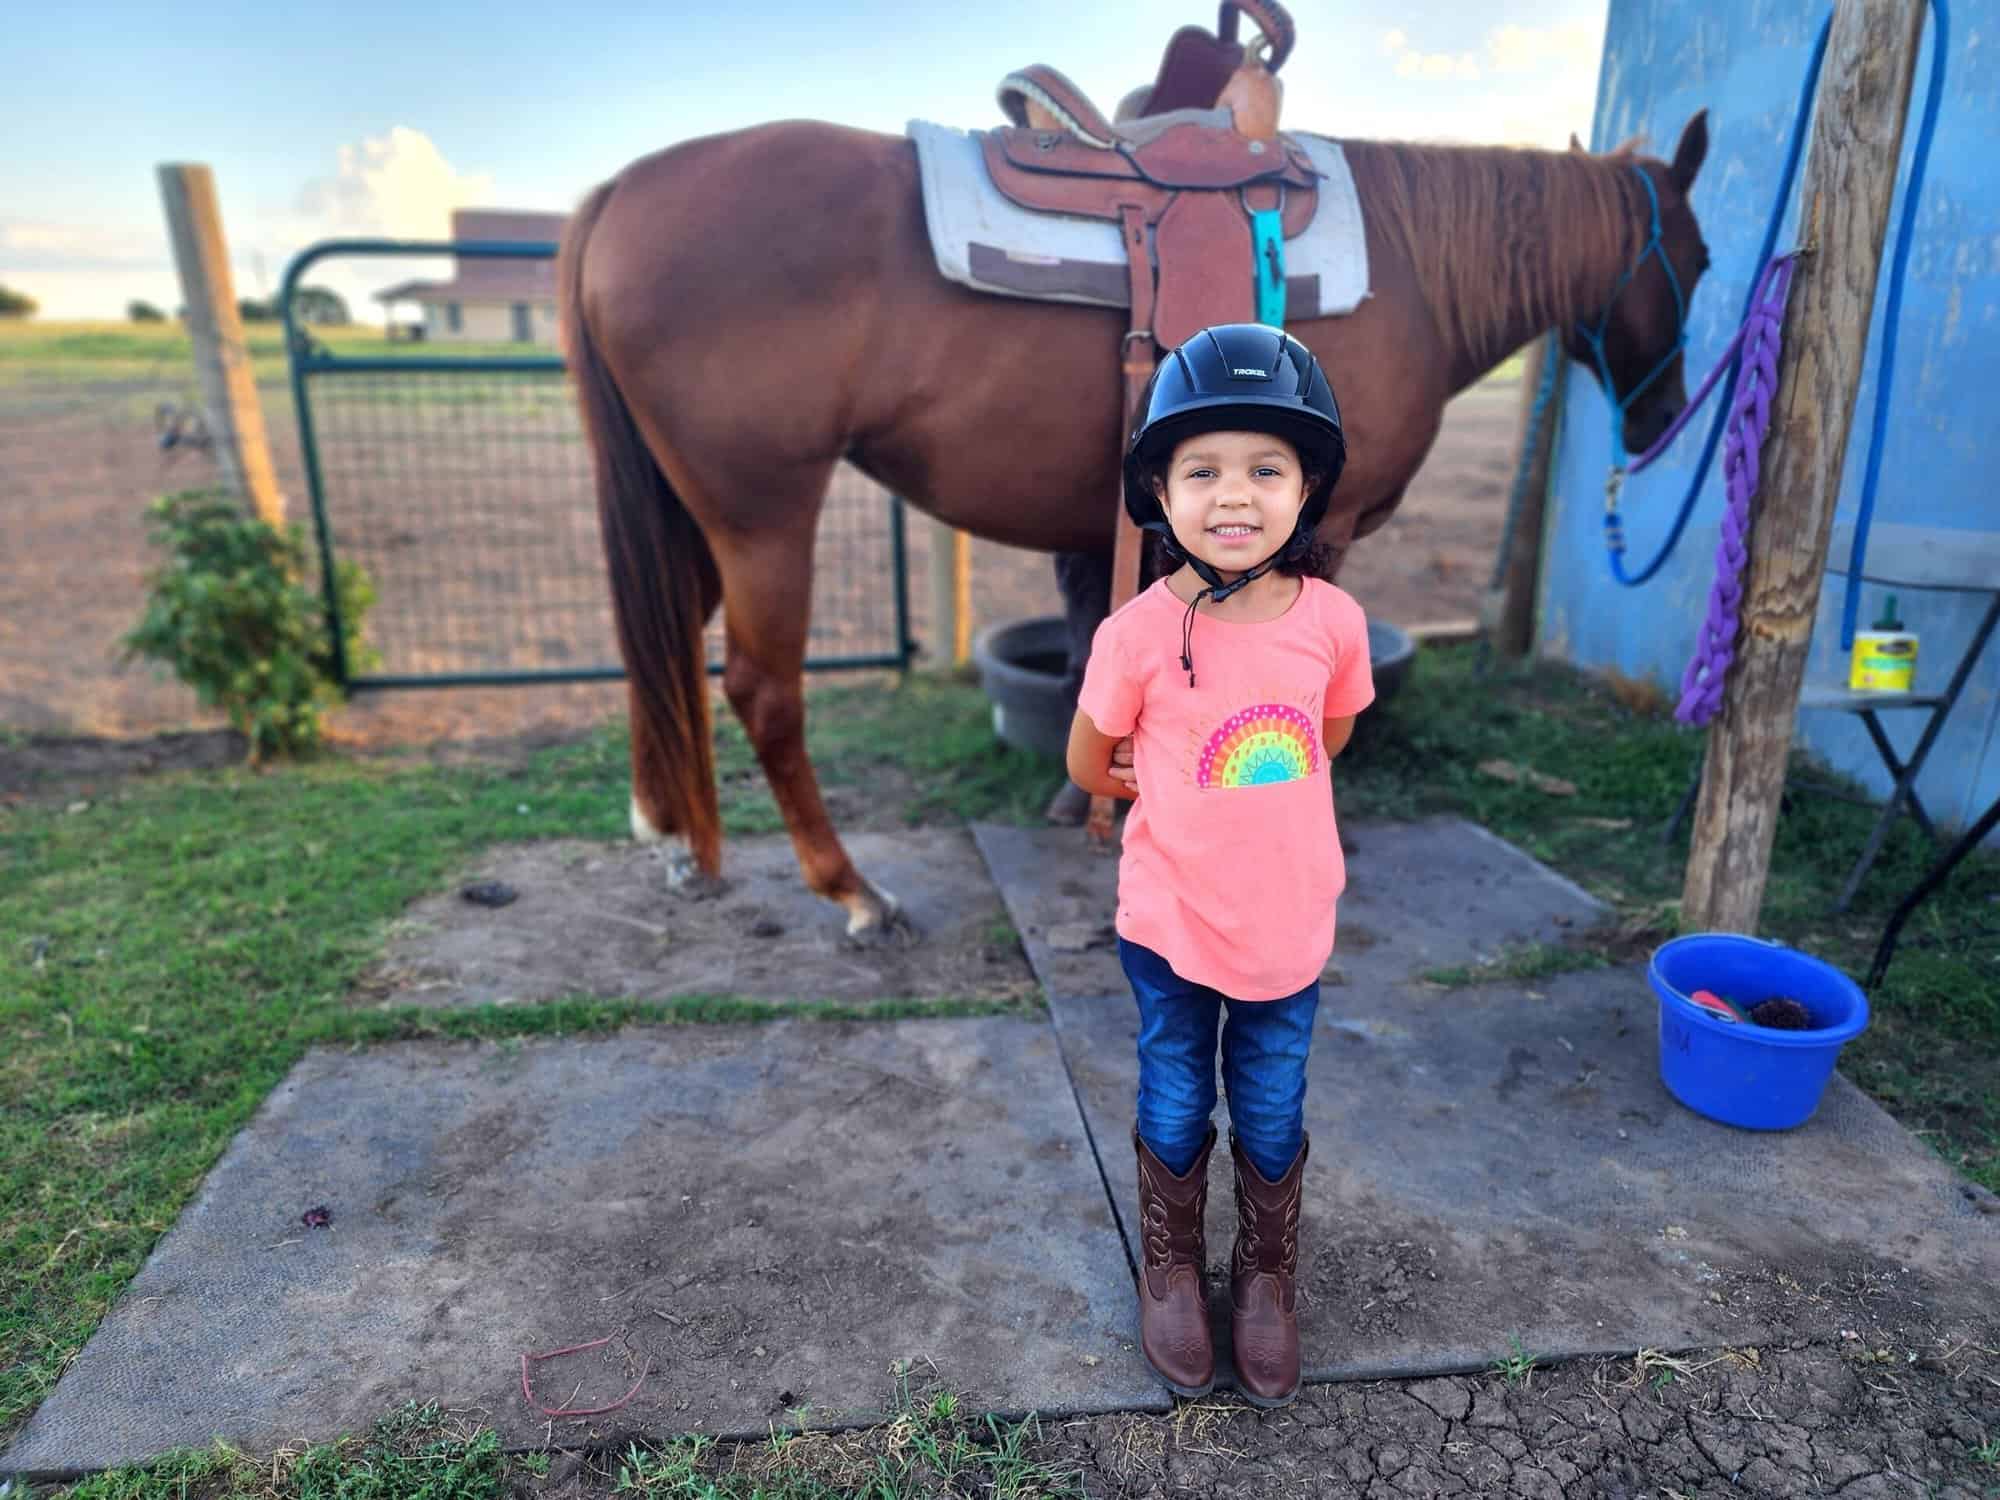 Horseback riding clothing and gear for kids for horseback riding lessons